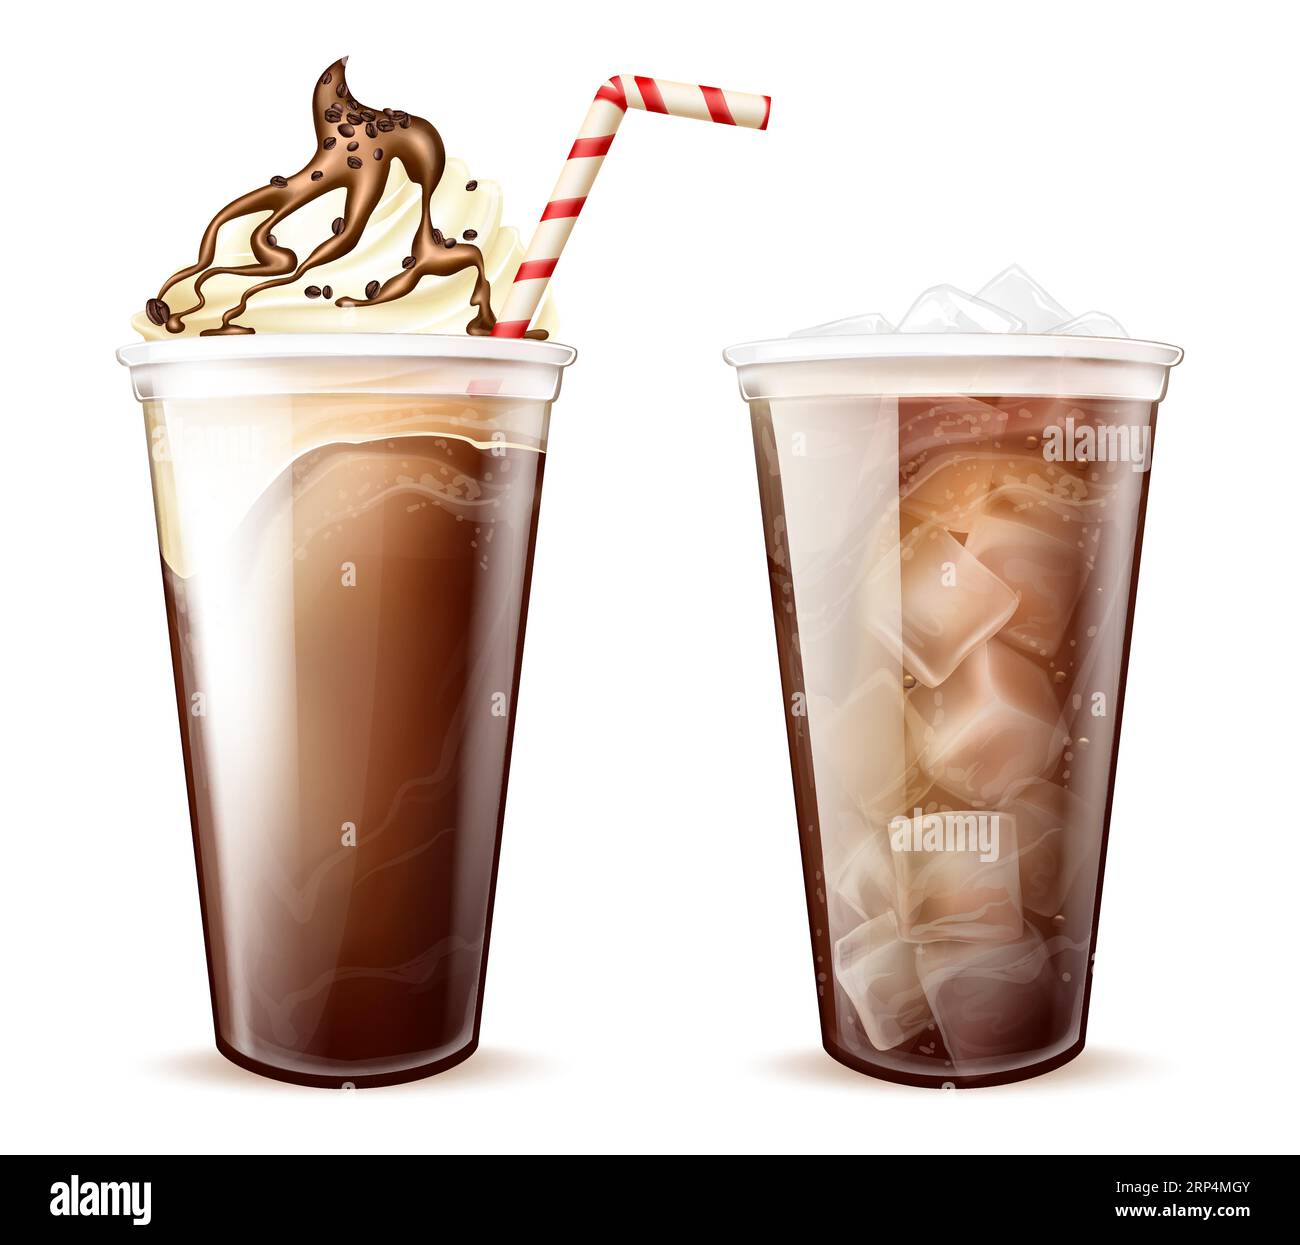 https://c8.alamy.com/comp/2RP4MGY/frappe-coffee-cola-with-ice-cubes-in-disposable-plastic-cups-set-frappucino-with-whipped-cream-chocolate-or-caramel-topping-and-soda-beverage-cold-2RP4MGY.jpg